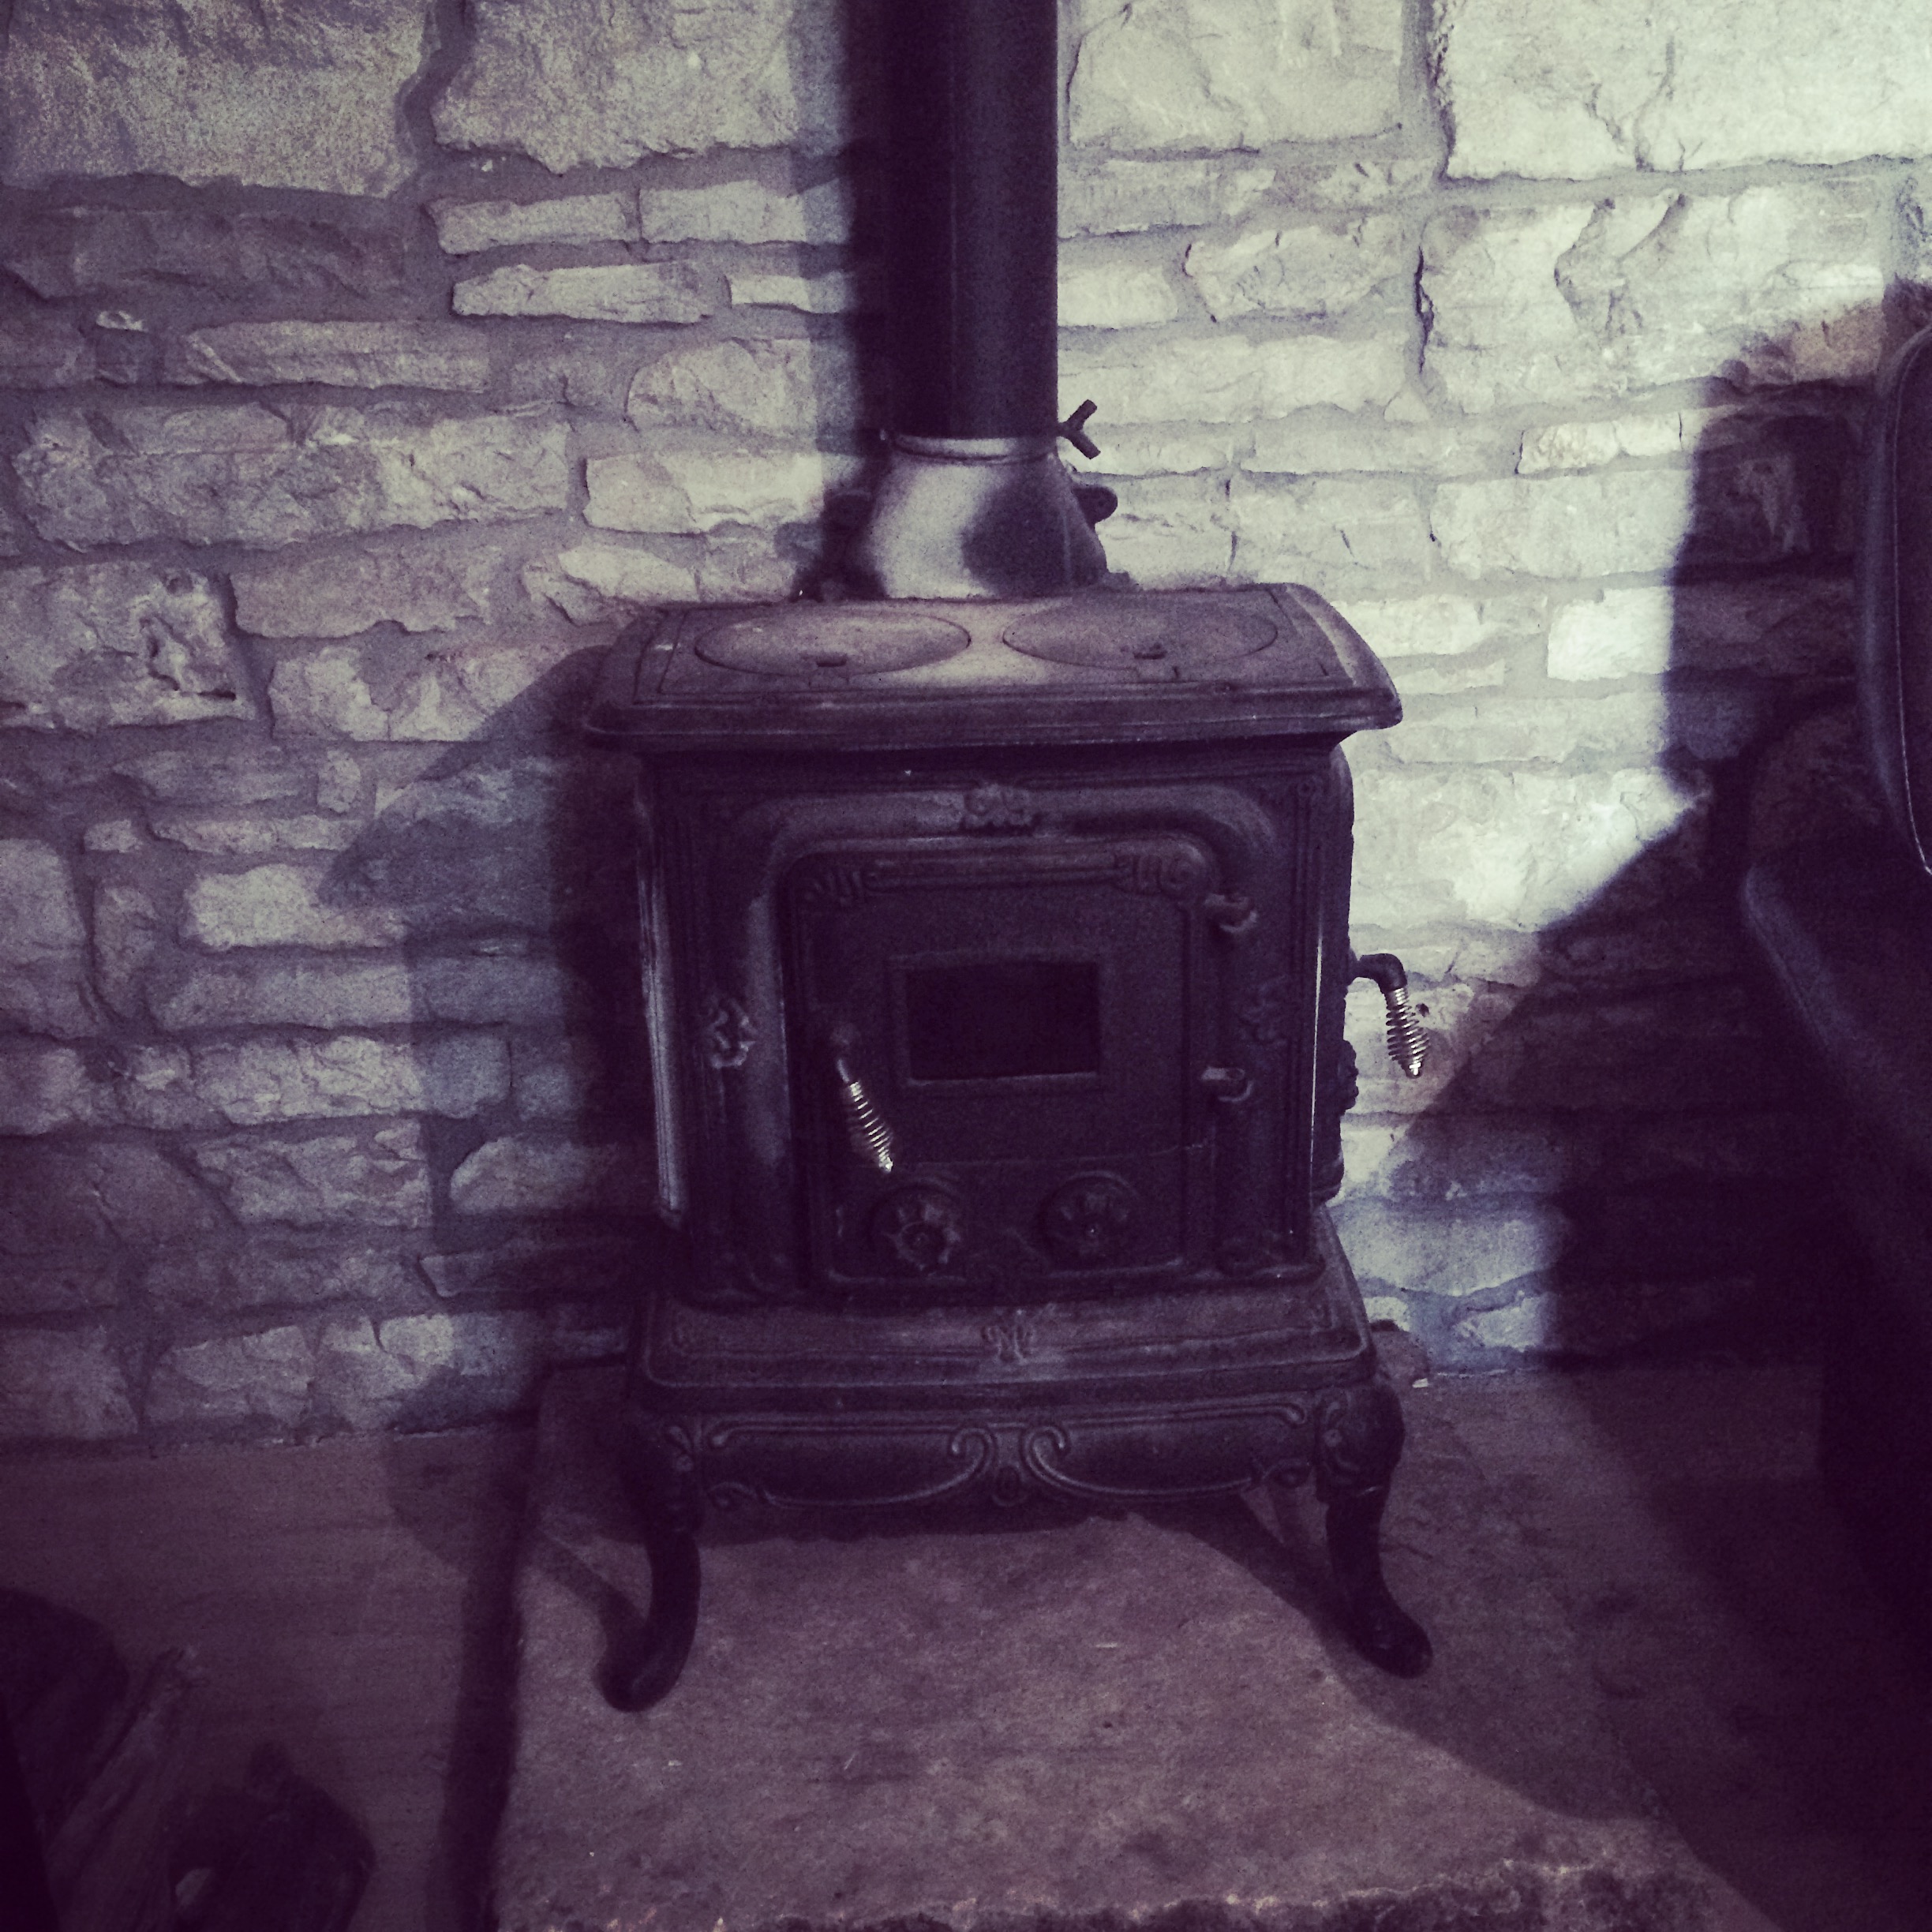 We love a woodburner, but maybe not this one...